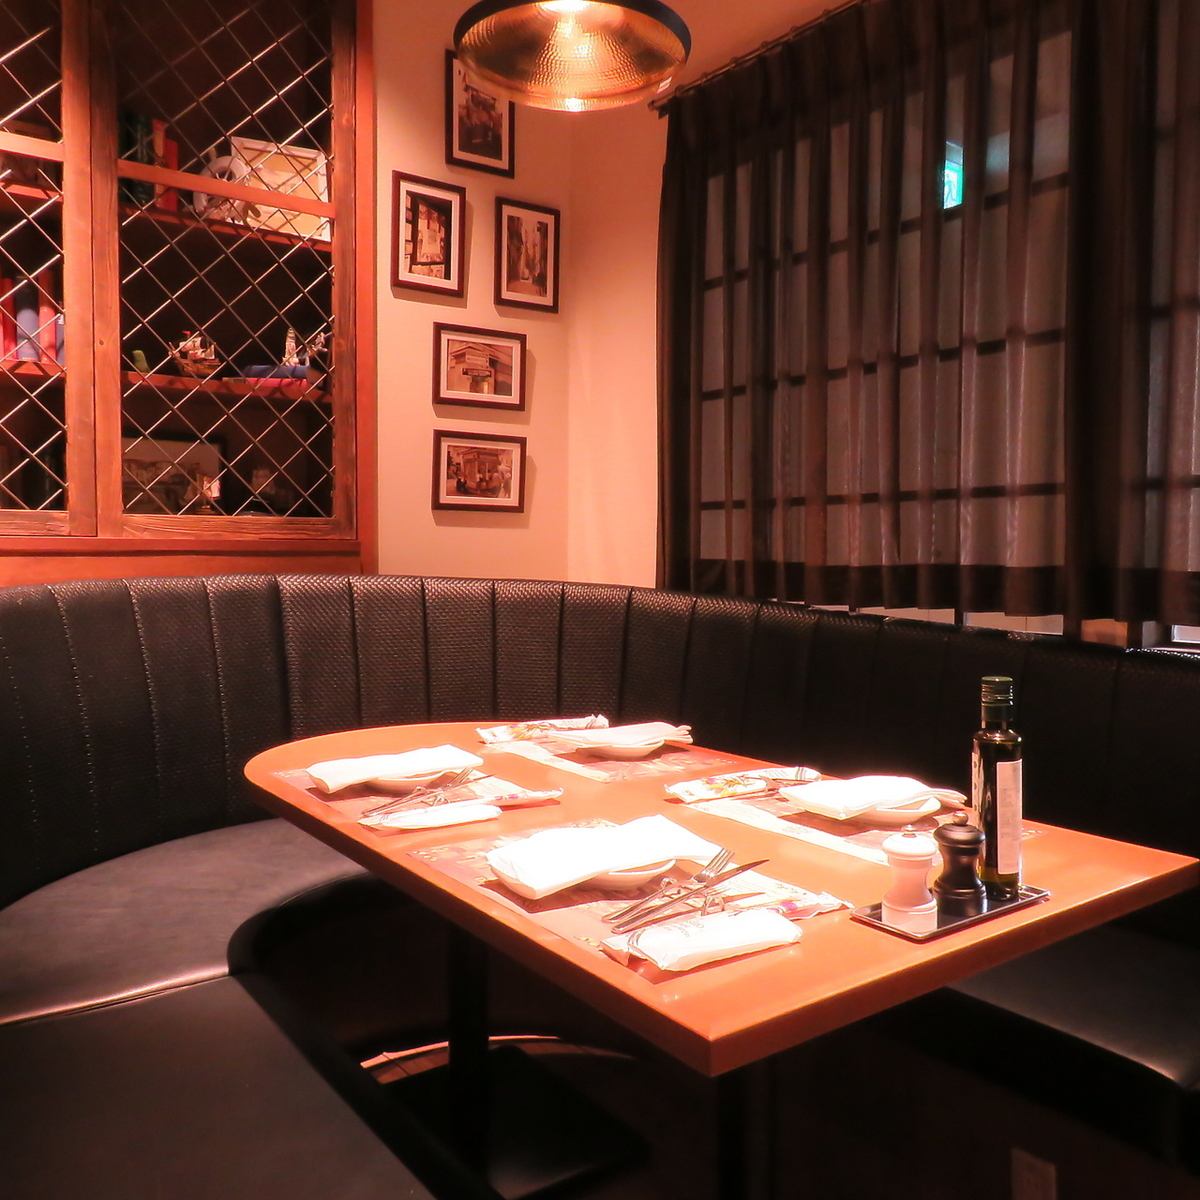 You can enjoy authentic Italian food in a stylish restaurant ♪